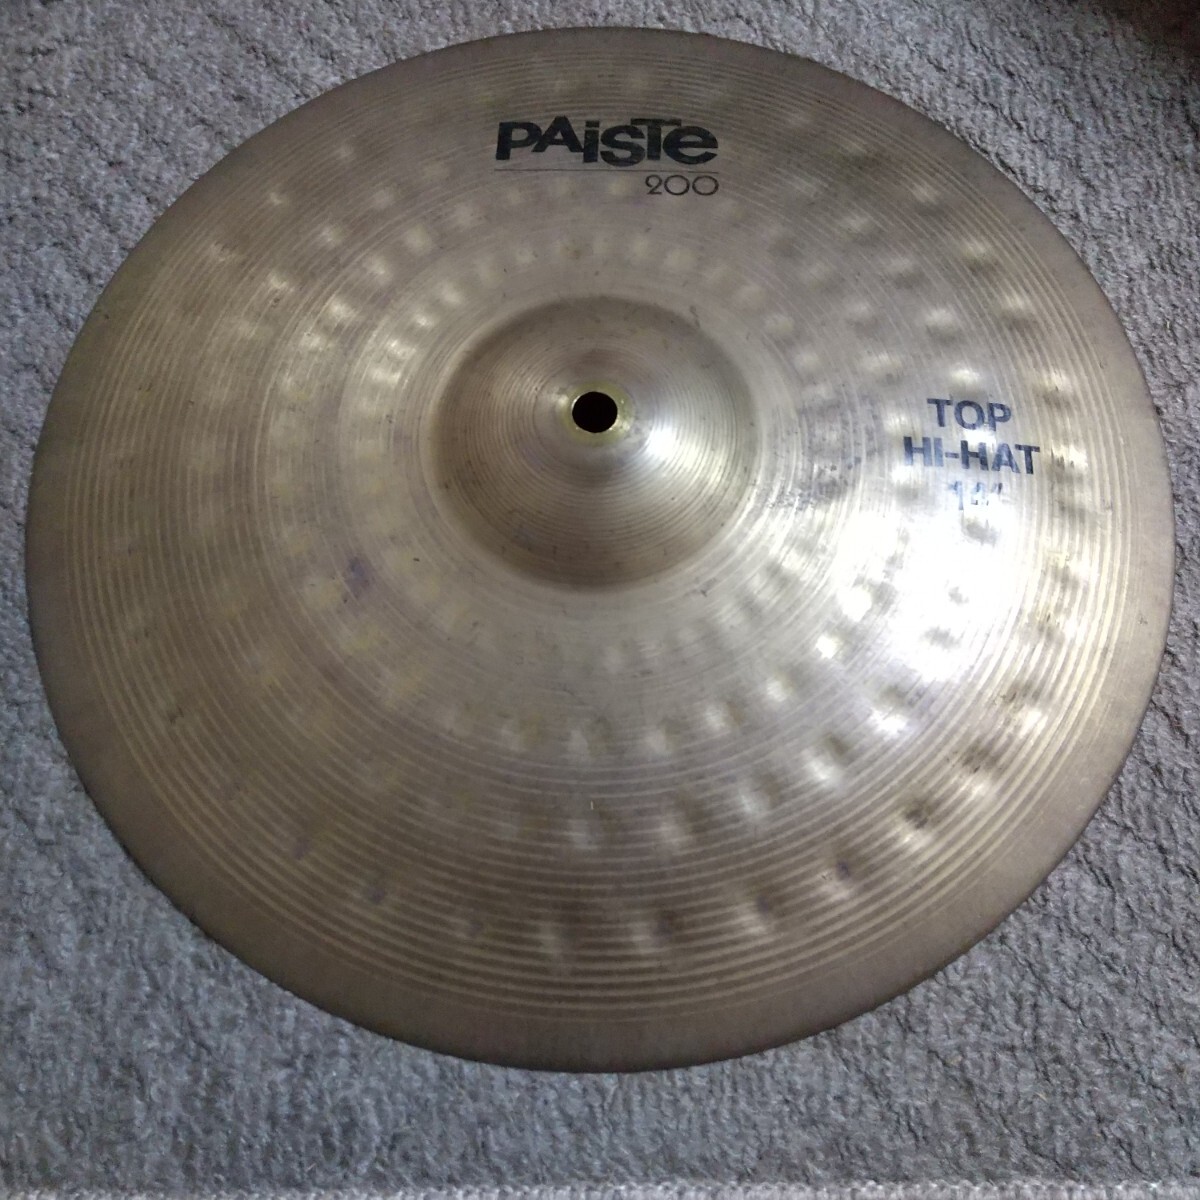 paiste 200 14” ハイハット MADE IN WEST GERMANY パイステ